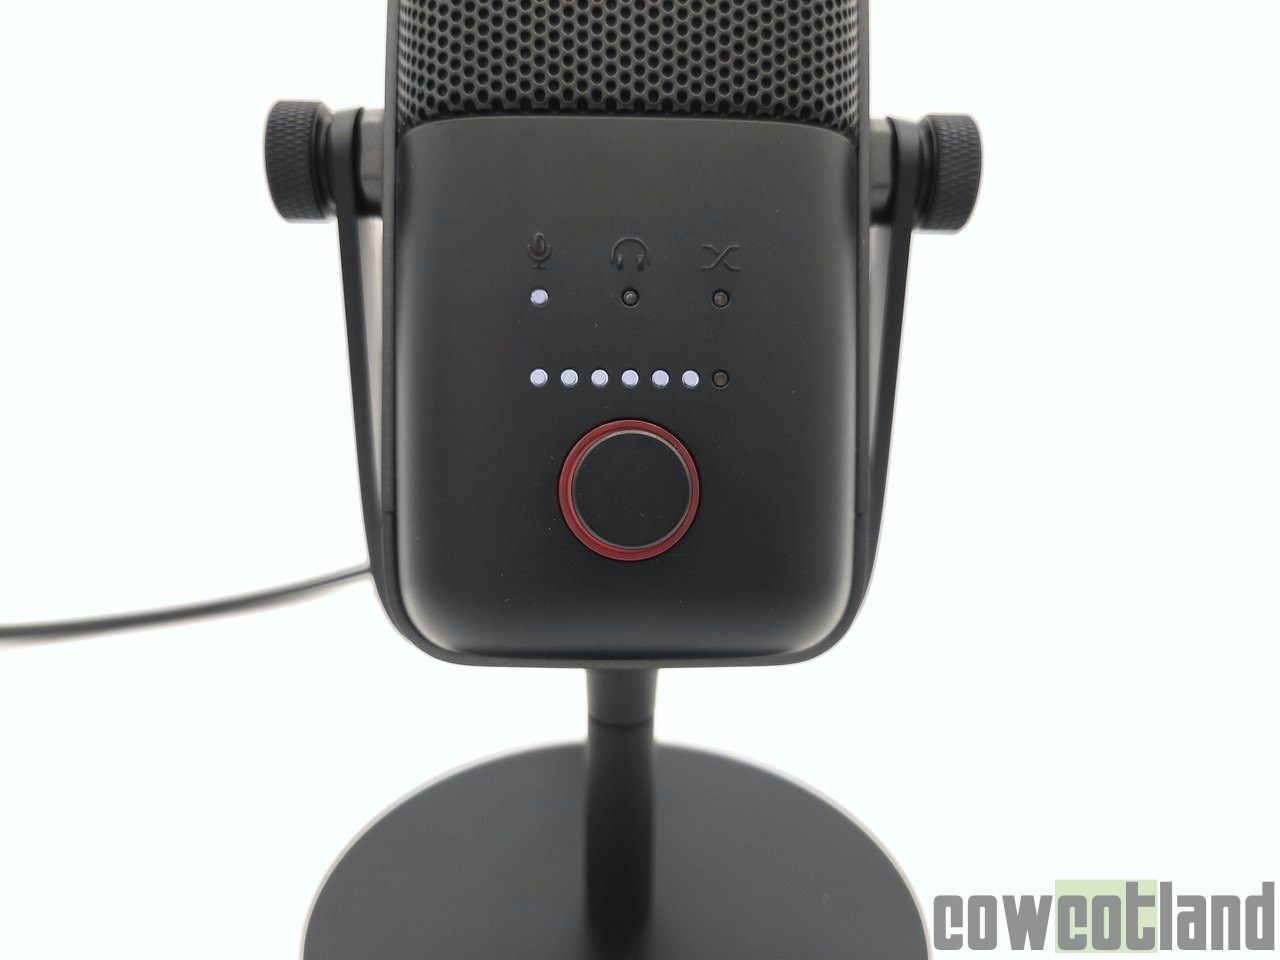 Image 44883, galerie Test Elgato Wave:3, un microphone cardiode USB taill pour le streaming